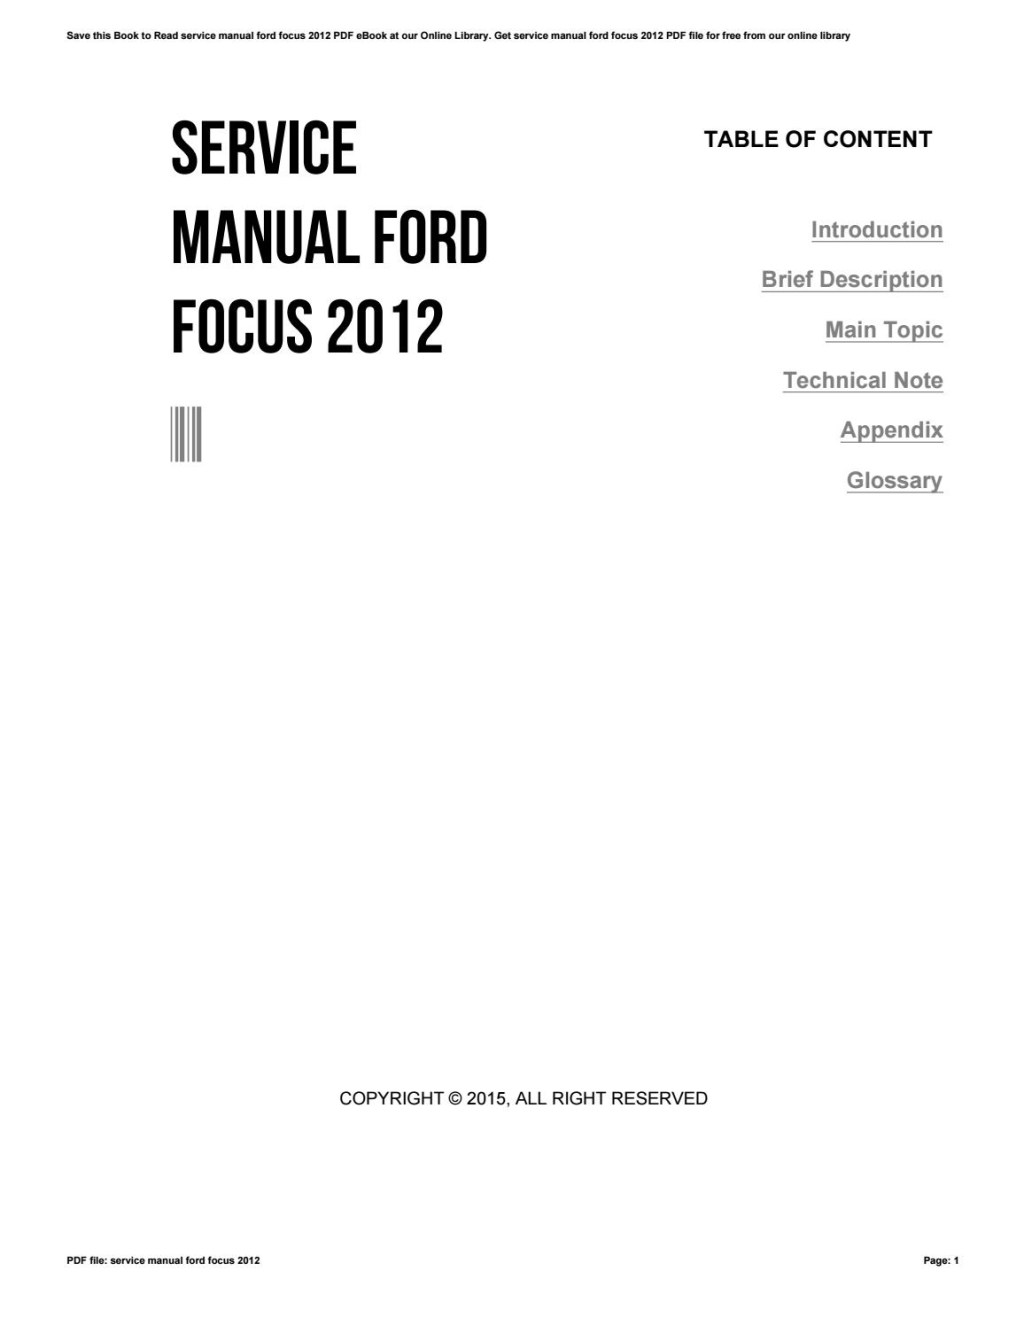 Picture of: Service manual ford focus  by szerz – Issuu